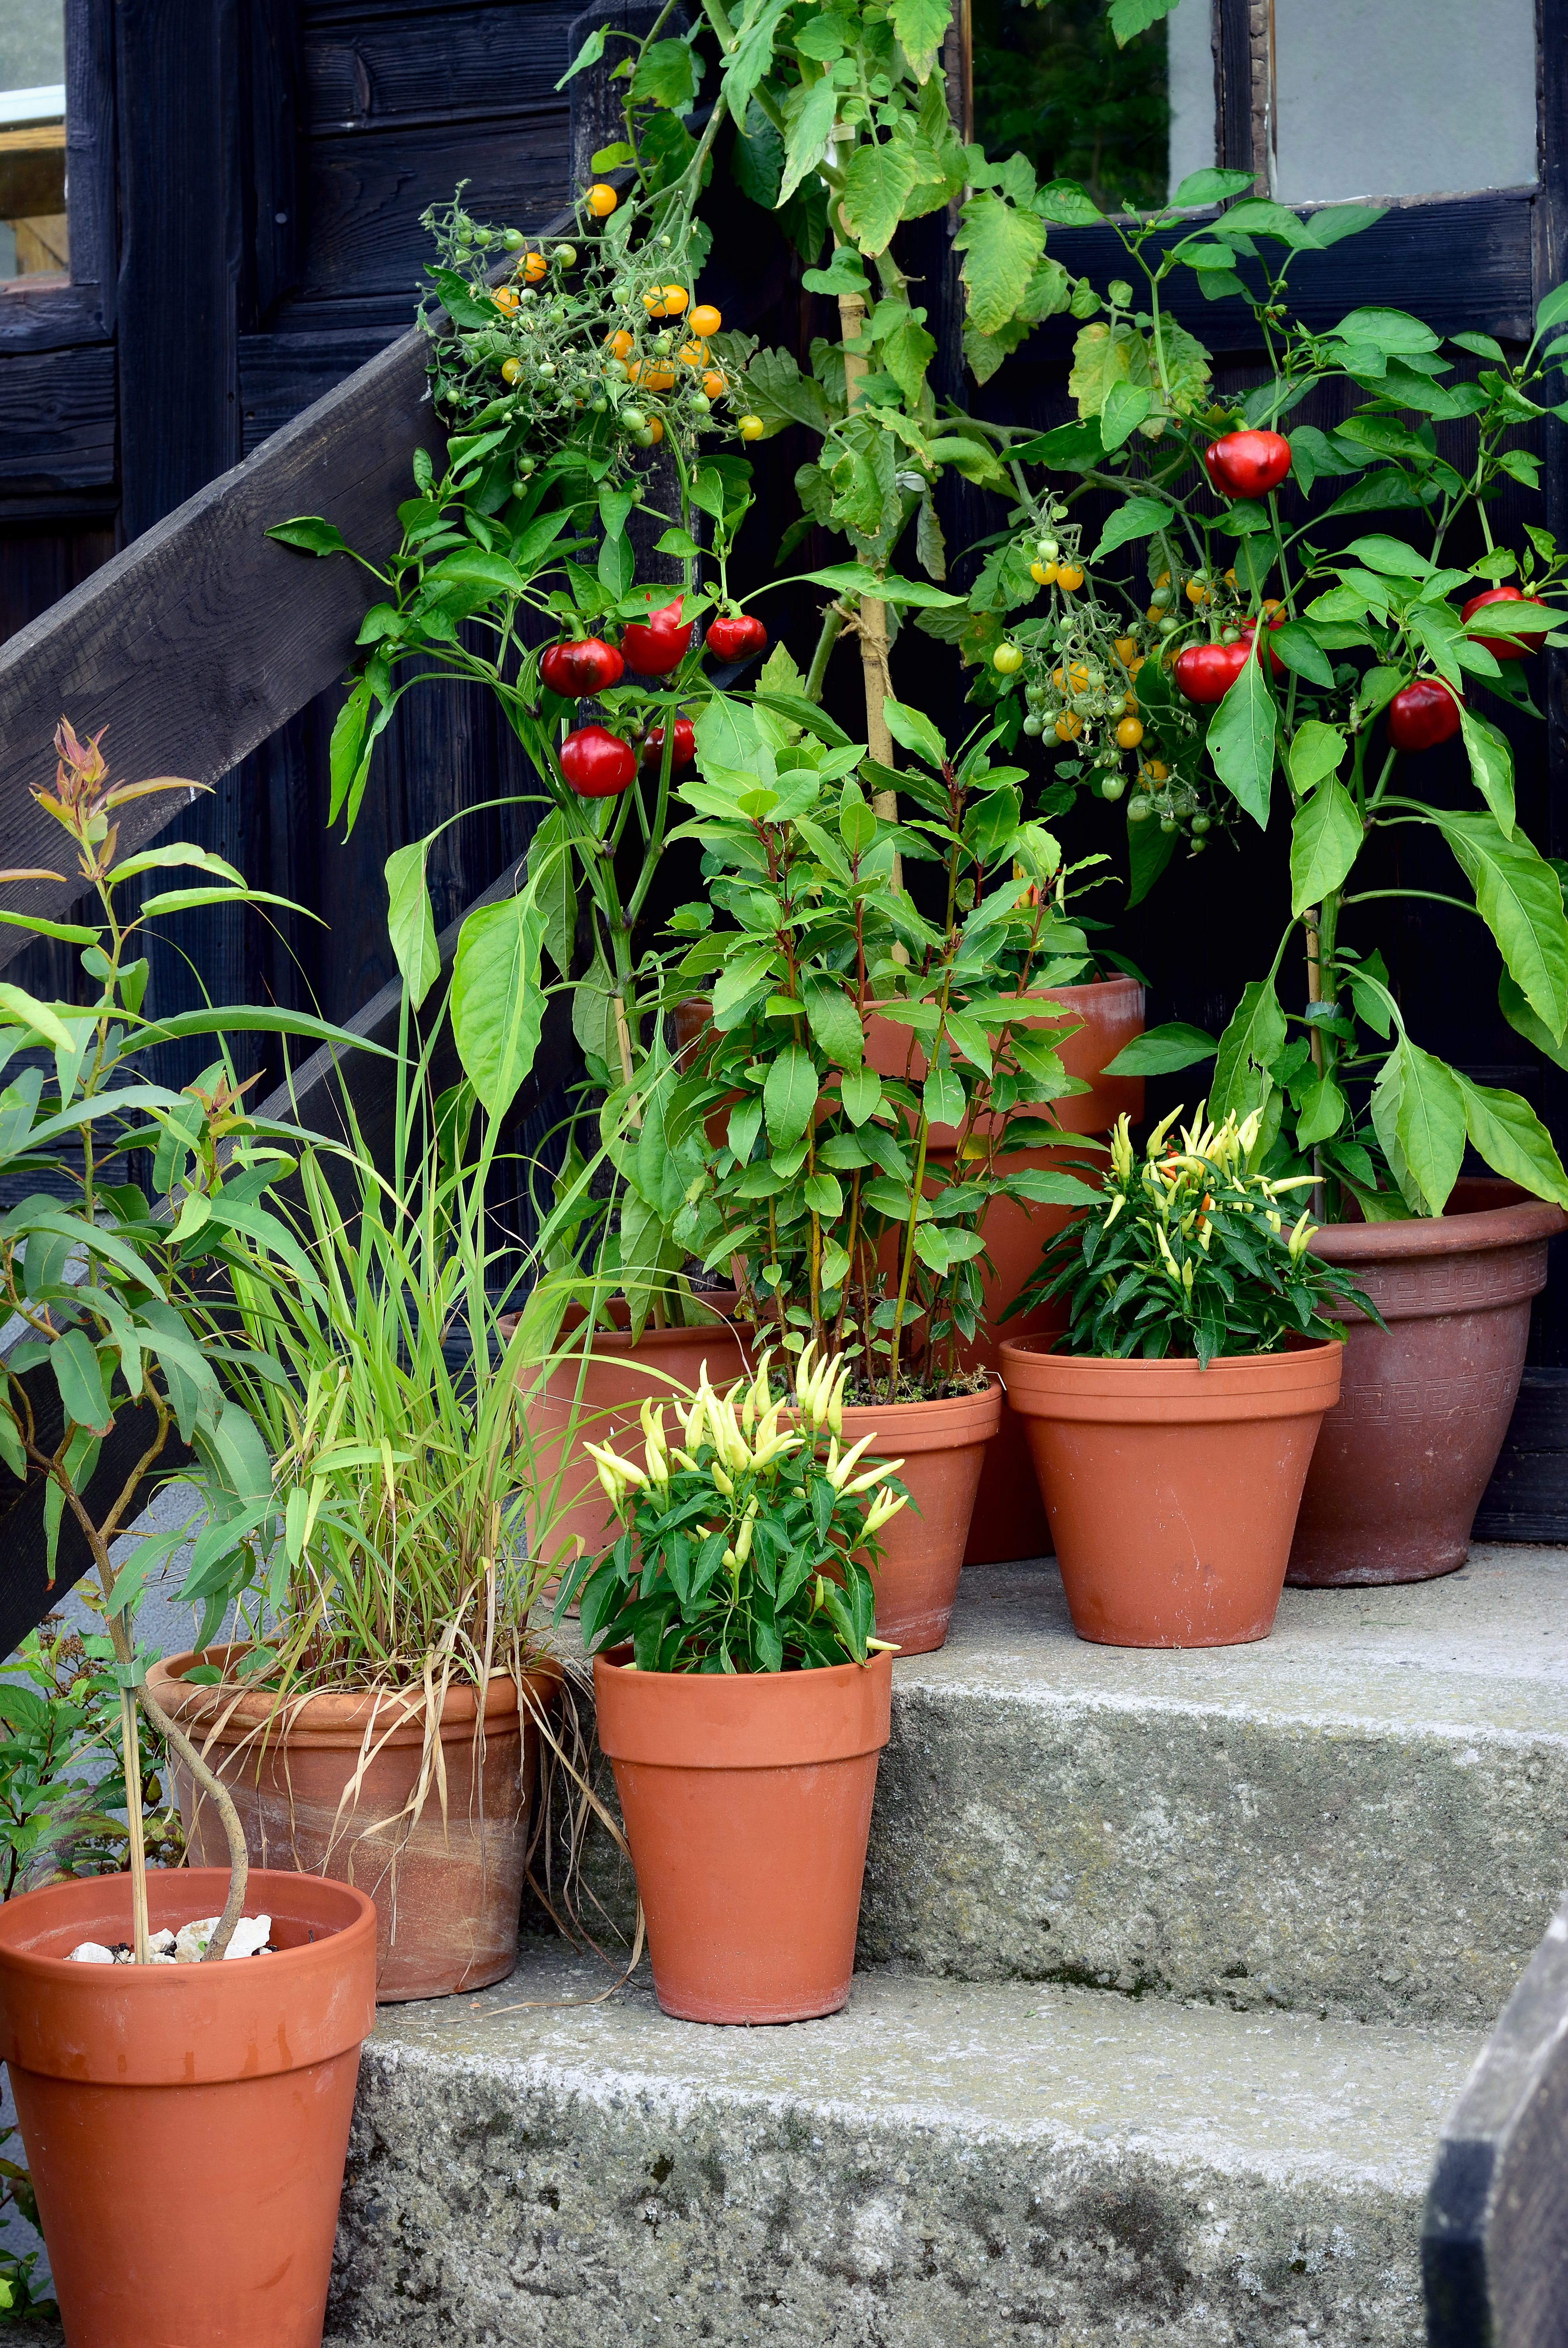 Mini Victory Gardens: Growing Vegetables in Containers